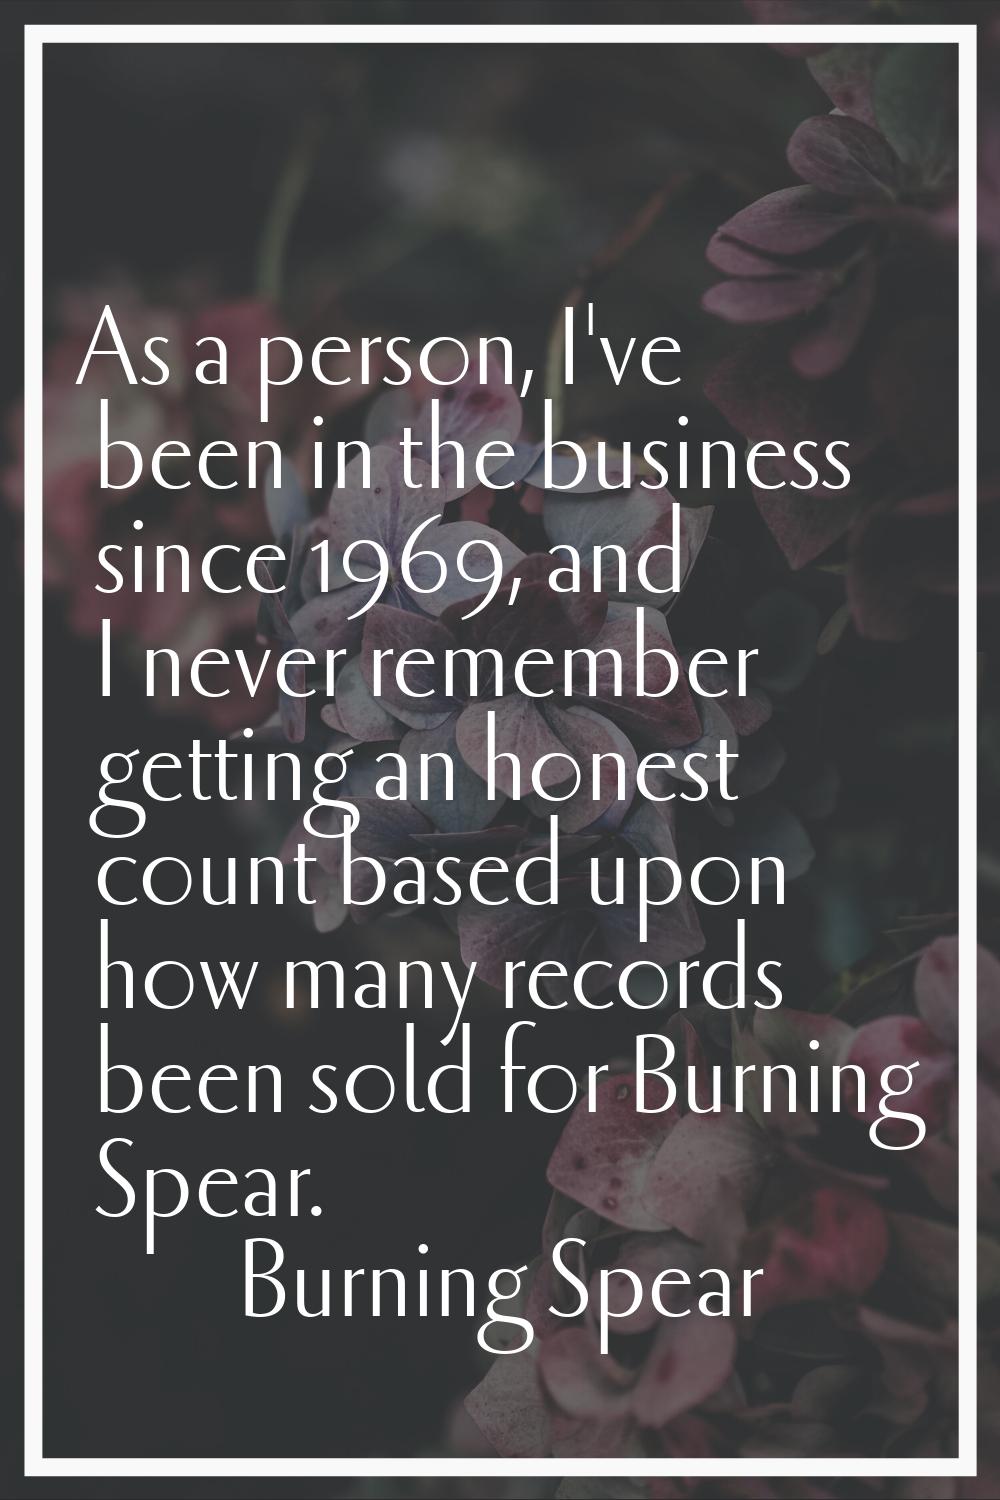 As a person, I've been in the business since 1969, and I never remember getting an honest count bas